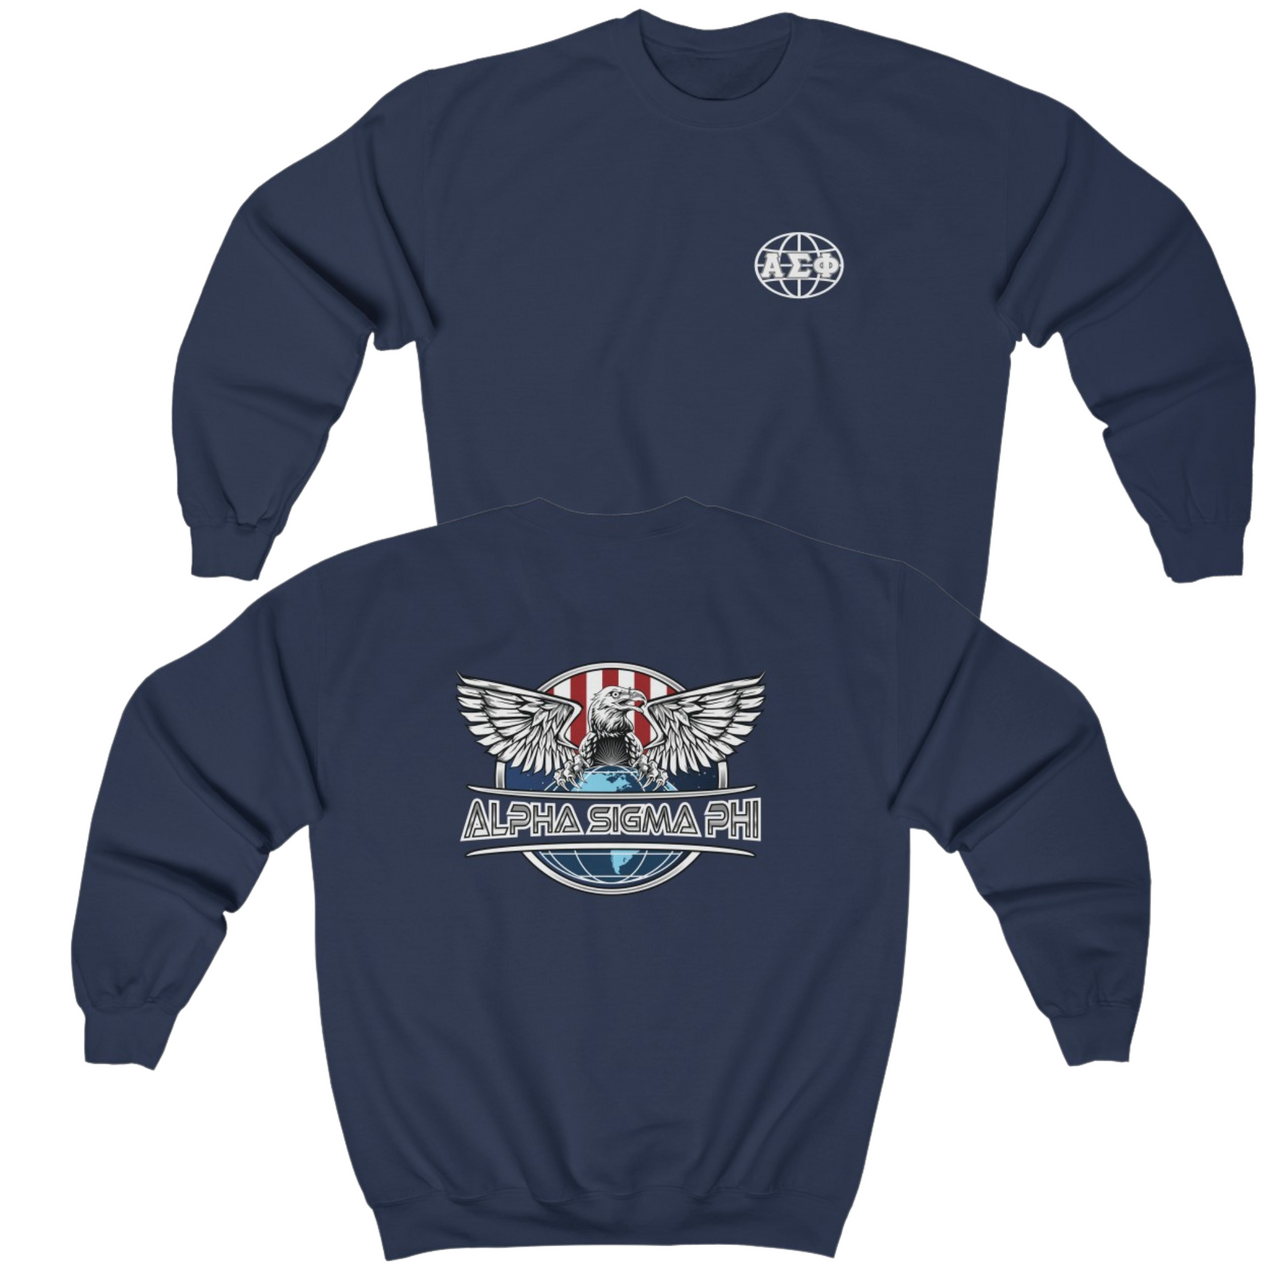 Navy Alpha Sigma Phi Graphic Crewneck Sweatshirt | The Fraternal Order | Alpha Sigma Phi Fraternity Clothes 